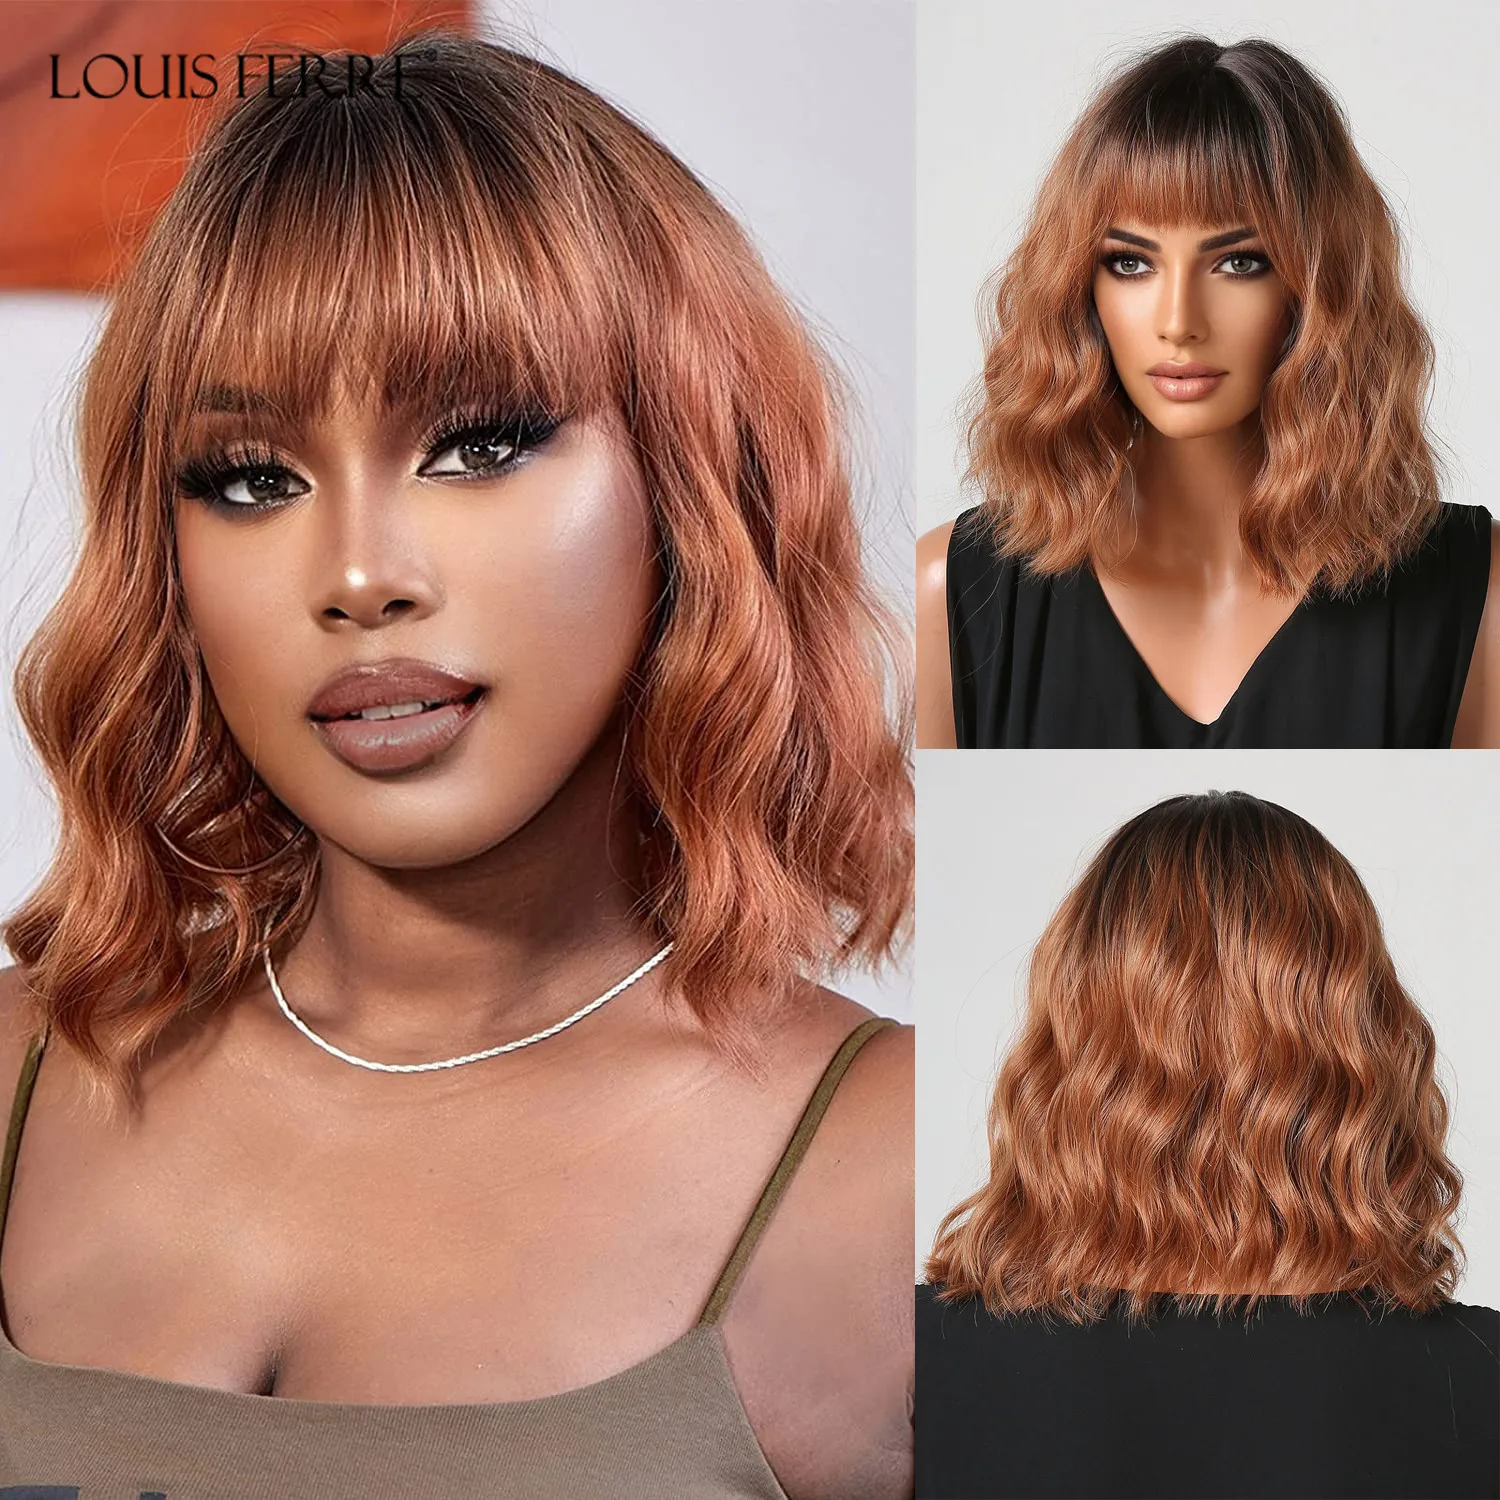 LOUIS FERRE Ombre Brown Body Wave Wig for Women Short Auburn Orange Wigs with Bangs Brown Natural Shoulder Length Bob Daily Hair